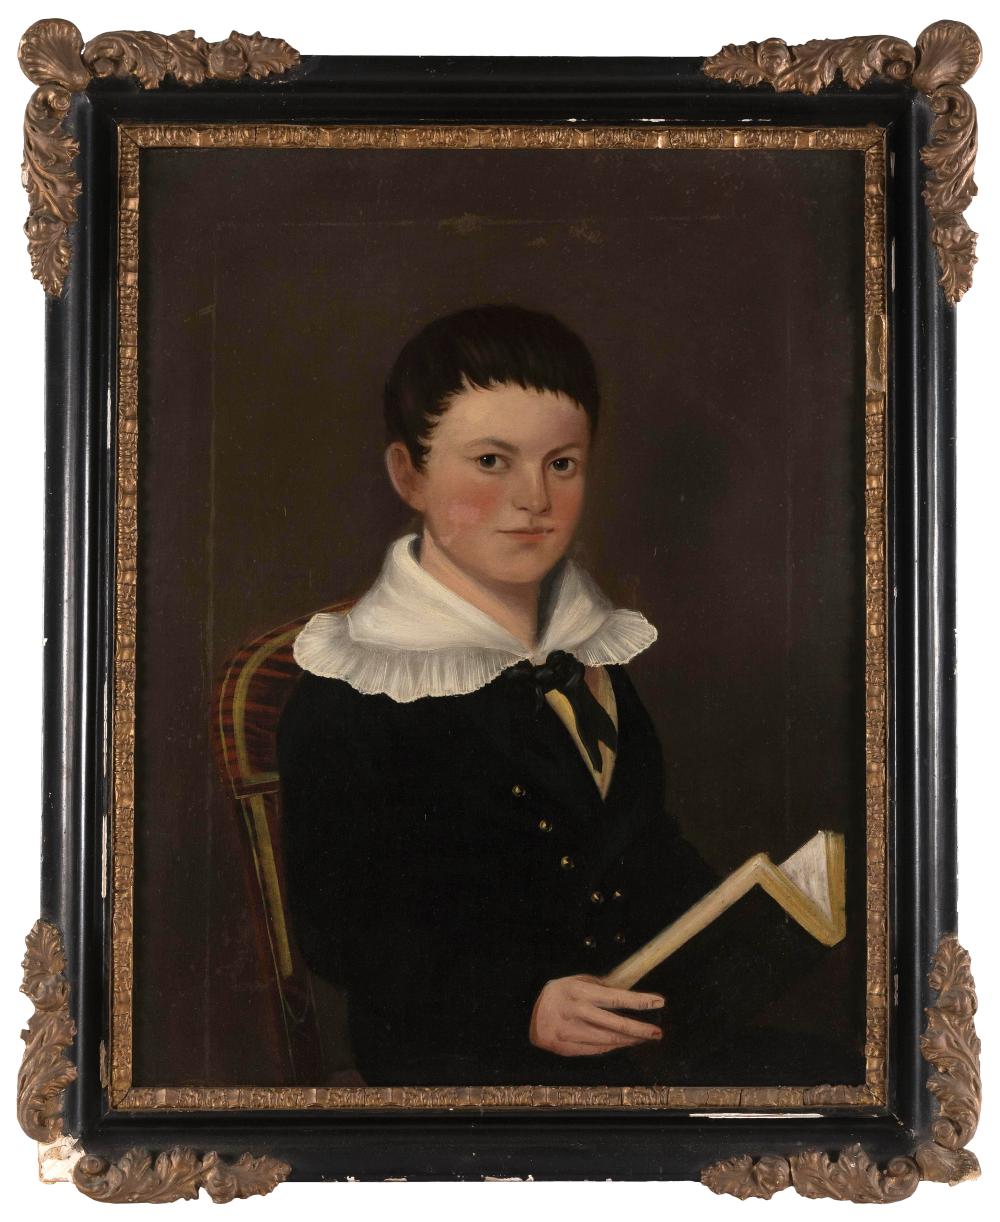 PORTRAIT OF A YOUNG BOY 19TH CENTURY